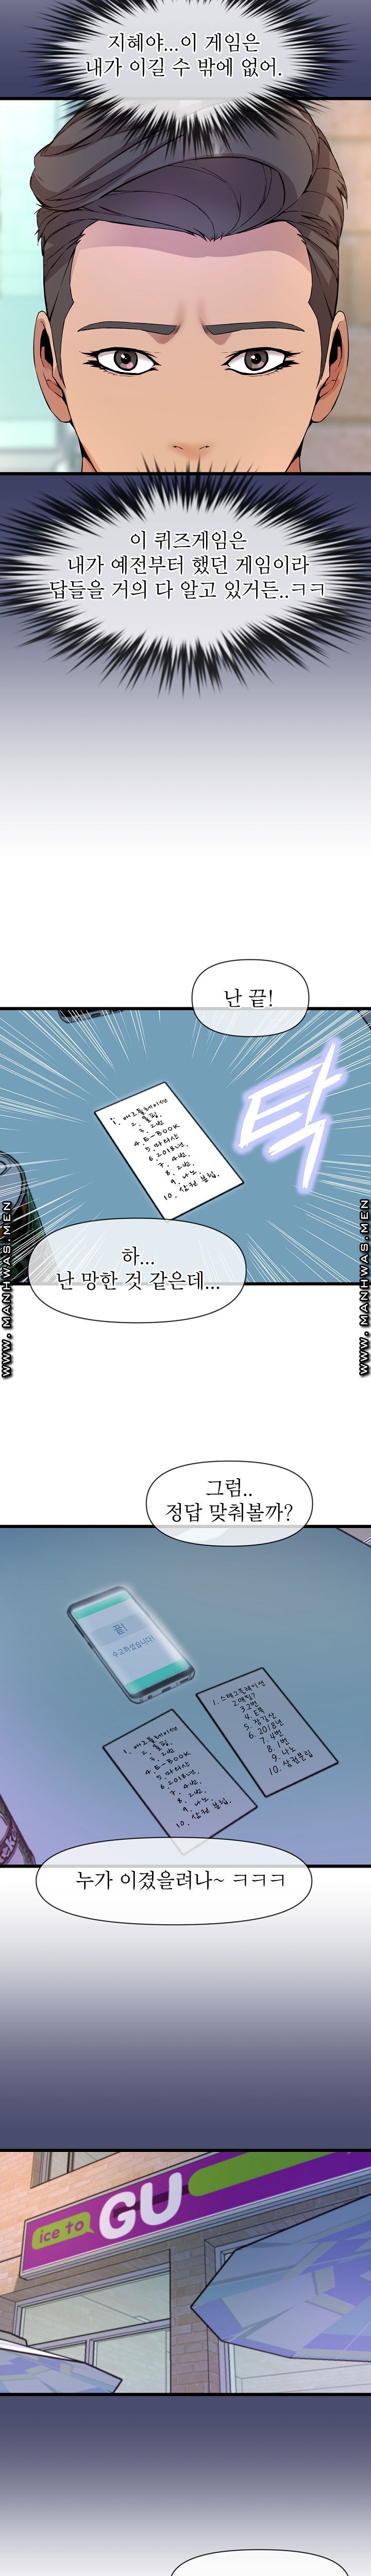 Boss of Reading Room Raw - Chapter 9 Page 5